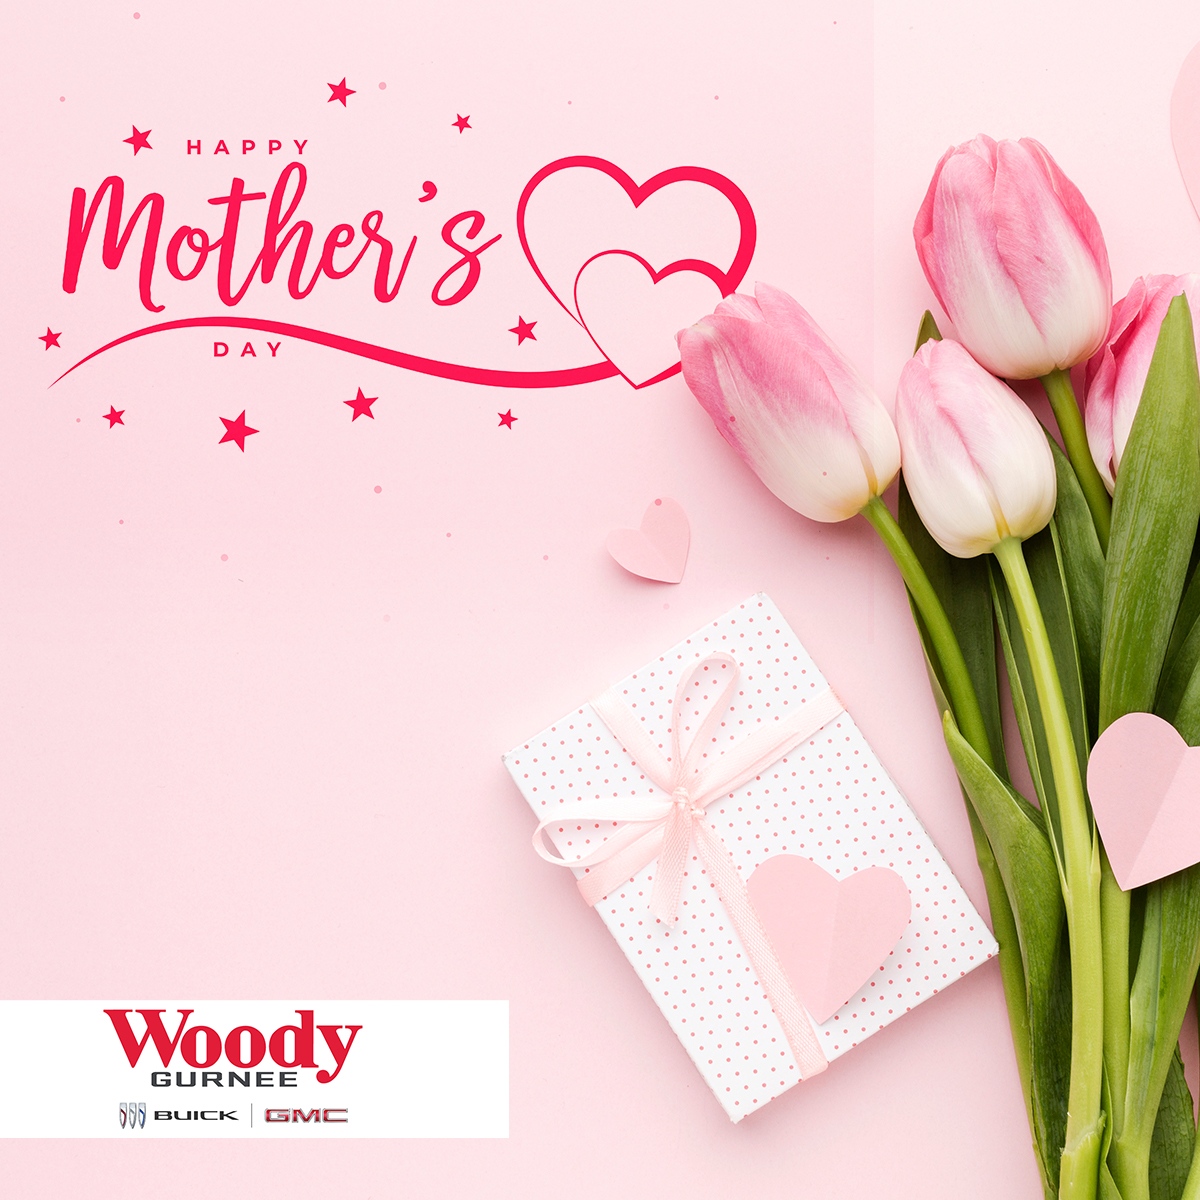 Flowers, breakfast in bed? Been there, done that! This year, shower your mom with love with the keys to a brand-new vehicle! 🚙🔑 This will be a Mother's Day she'll never forget! 🙌 #MothersDay #HappyMothersDay